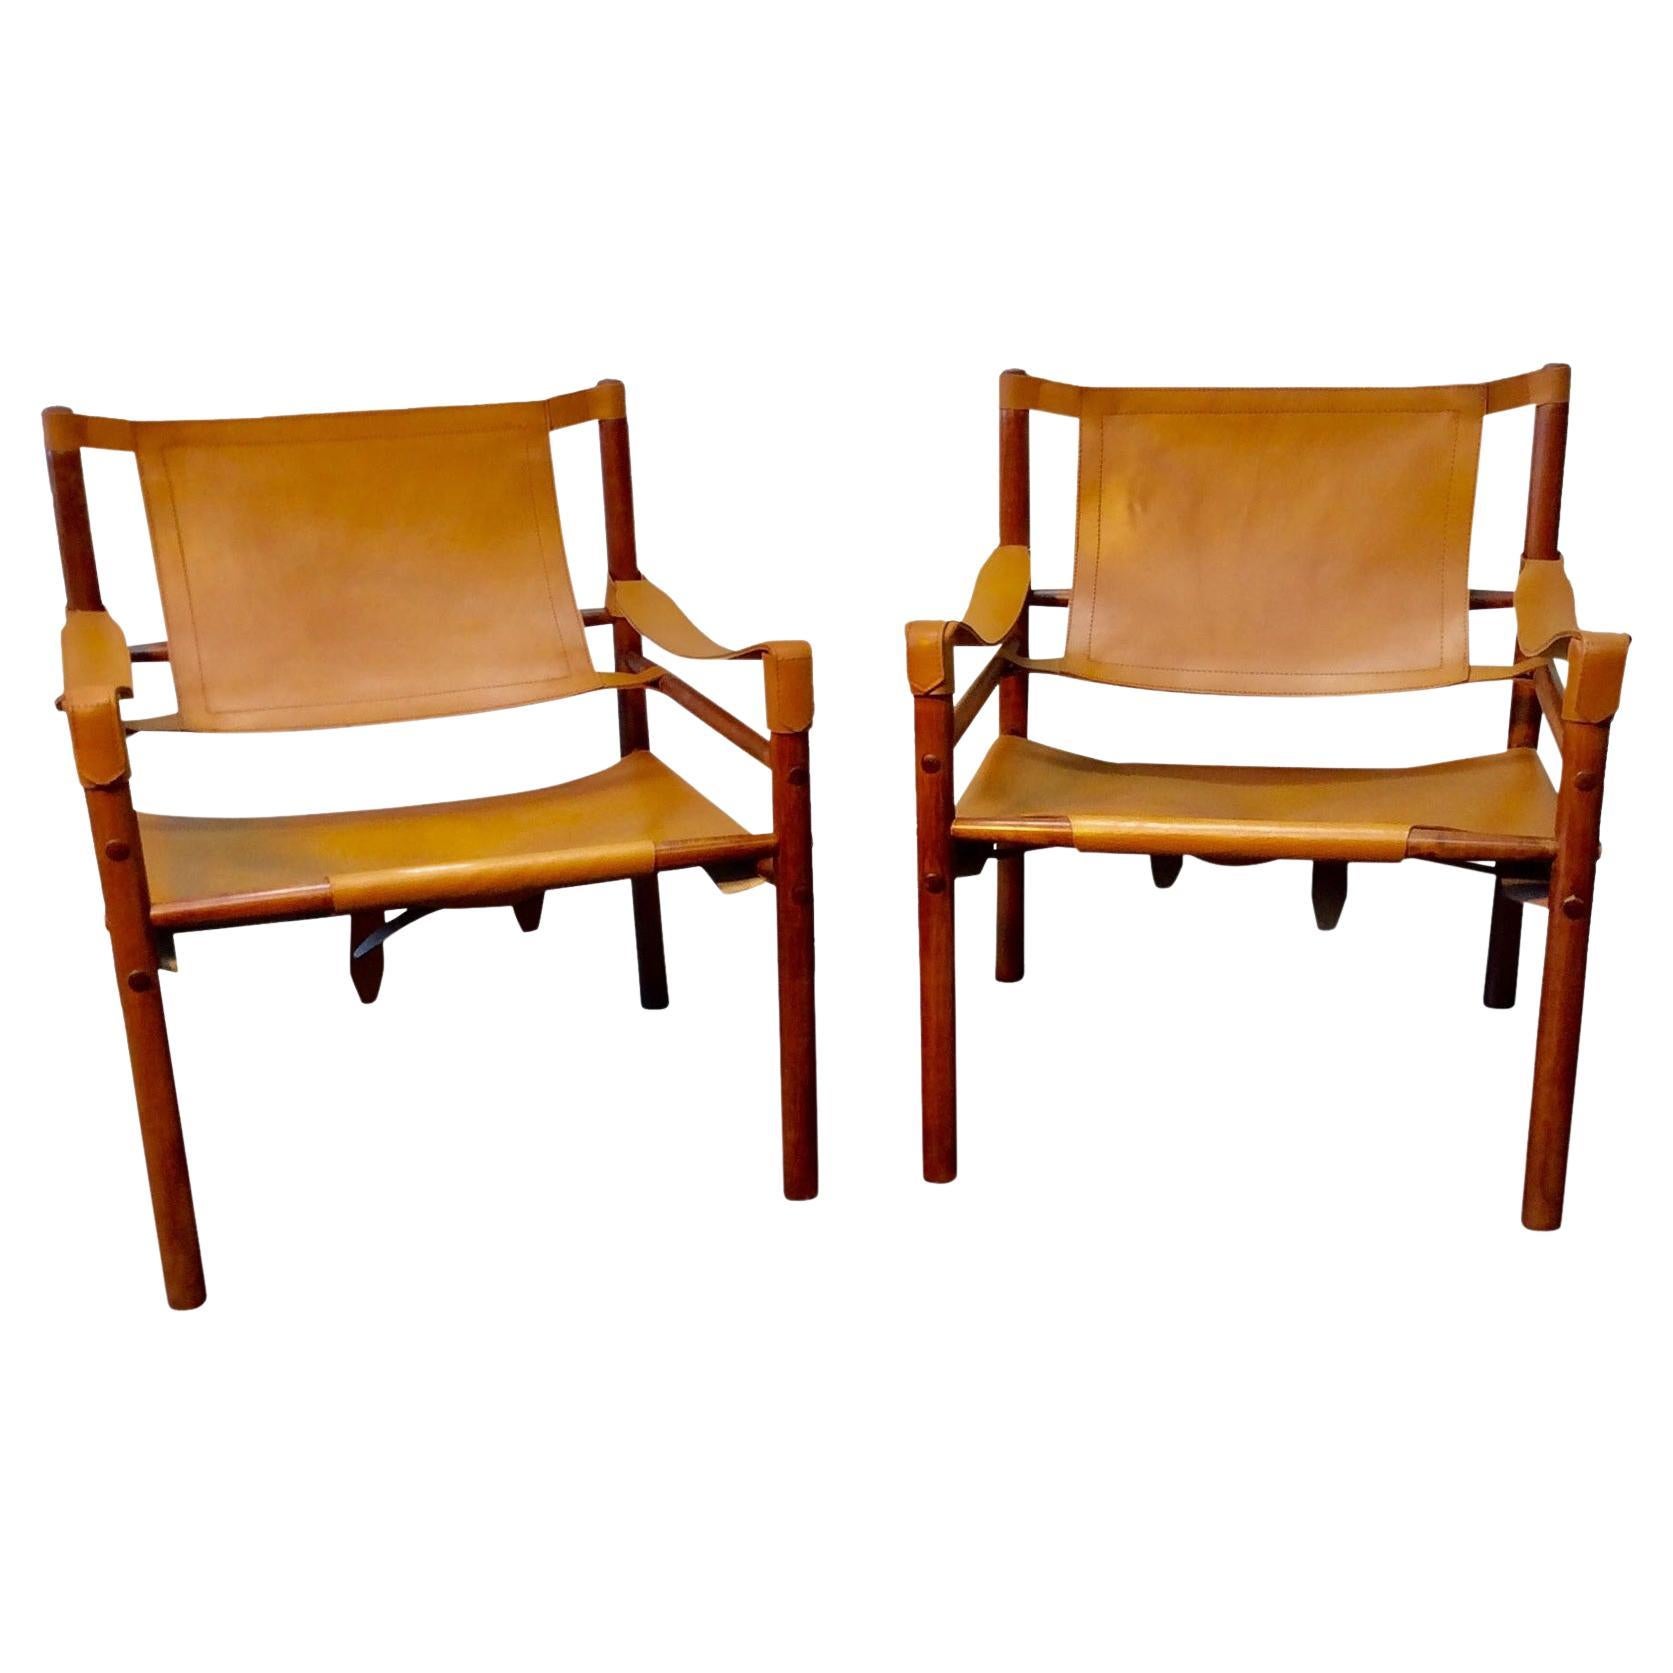 Mid-20th Century Abel Gonzalez Leather Sling Safari Chairs, a Pair